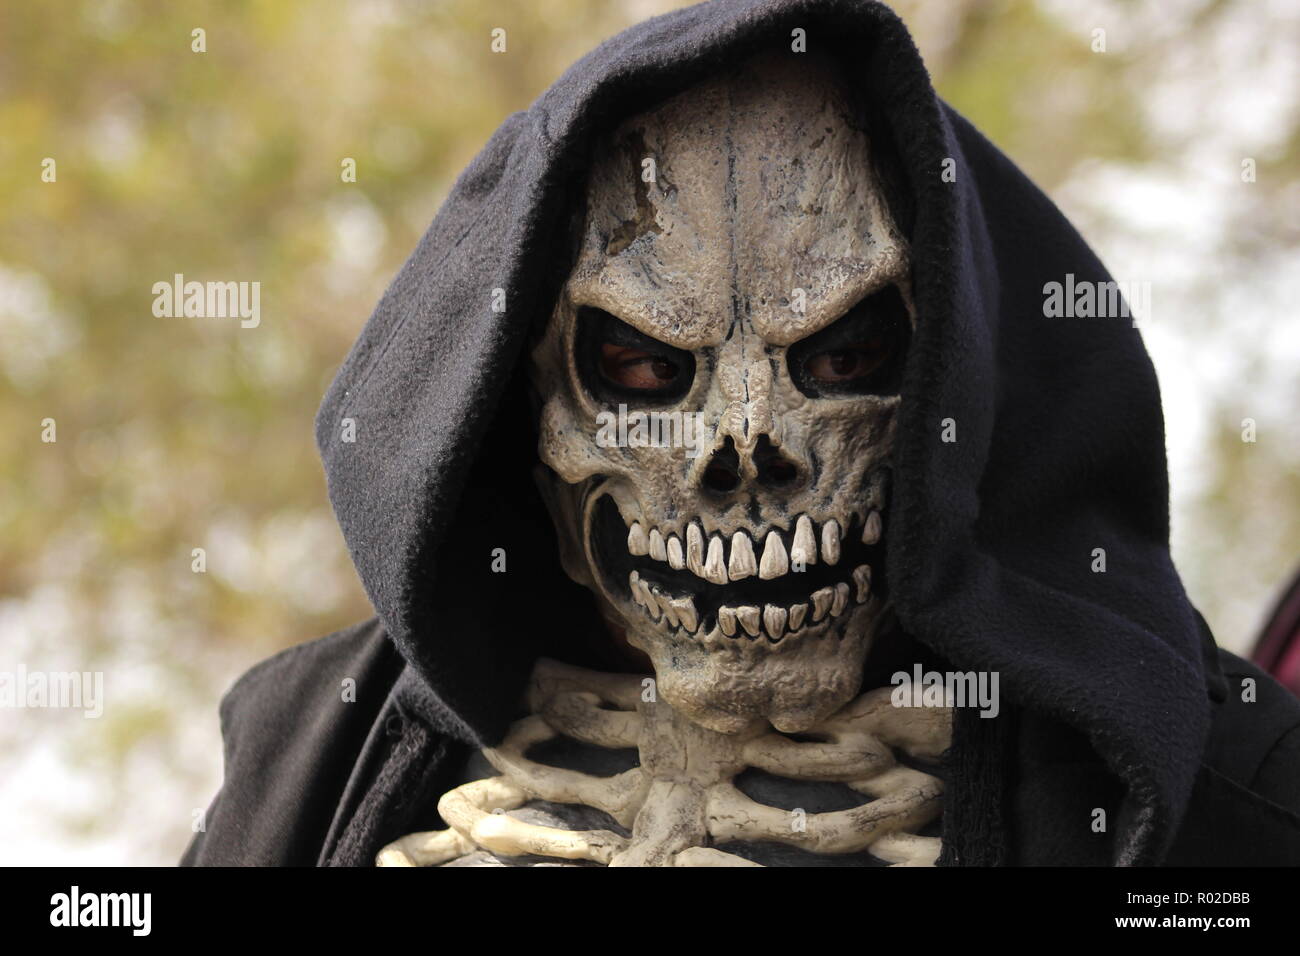 Scary closeup of a Grim Reaper face Stock Photo